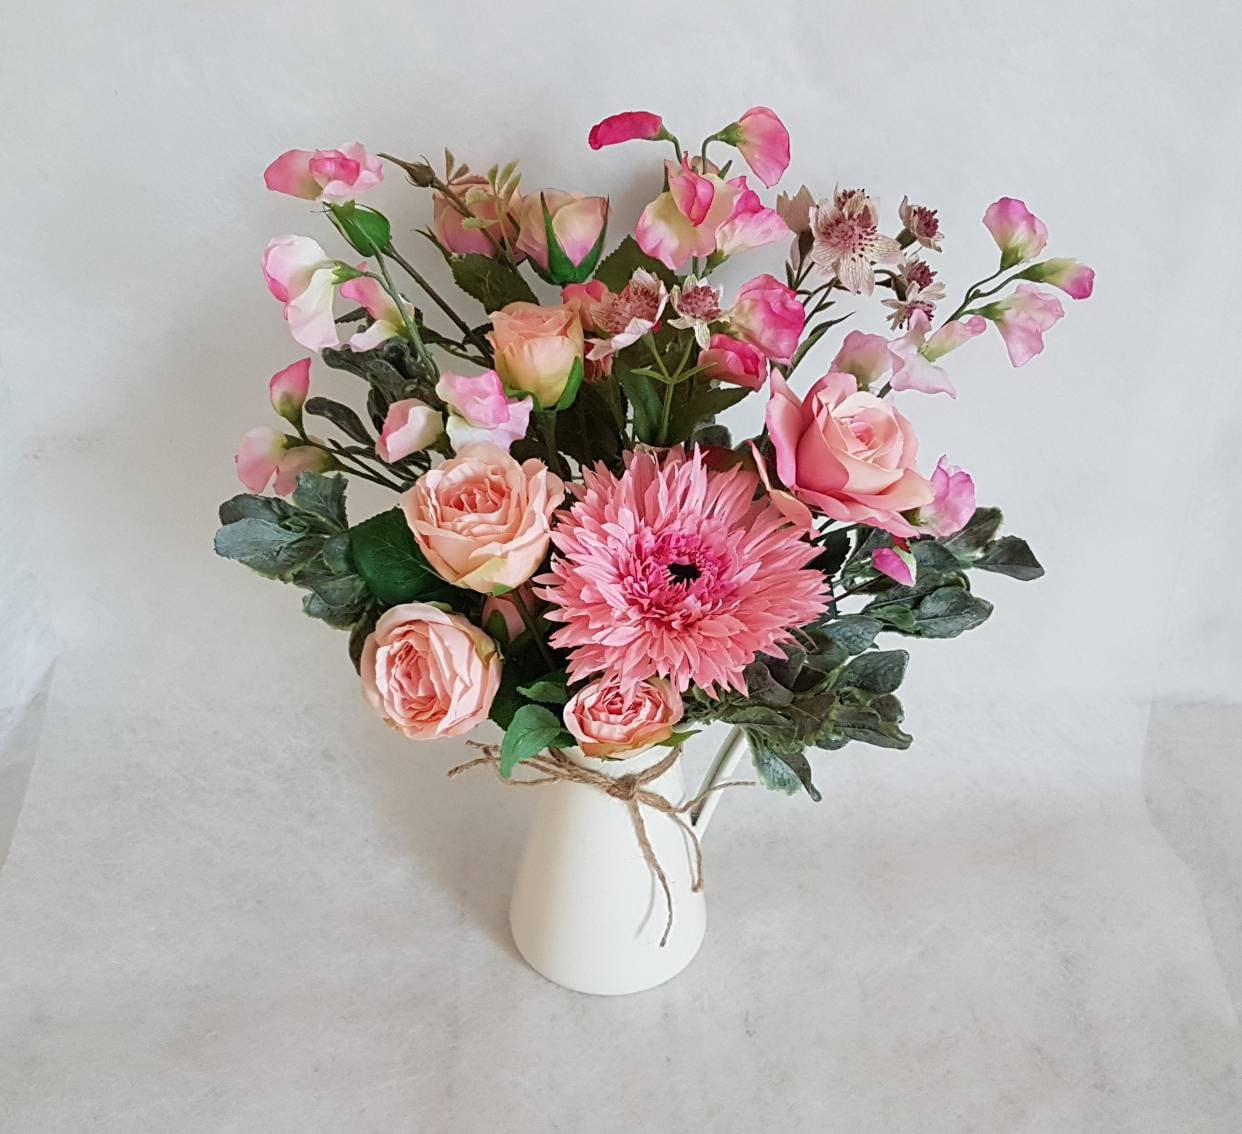 Pretty Vase of Artificial Flowers in Small White Ceramic Jug Floral  Arrangement Pink Peach Yellow Green Faux Flowers Country Style Pastel 